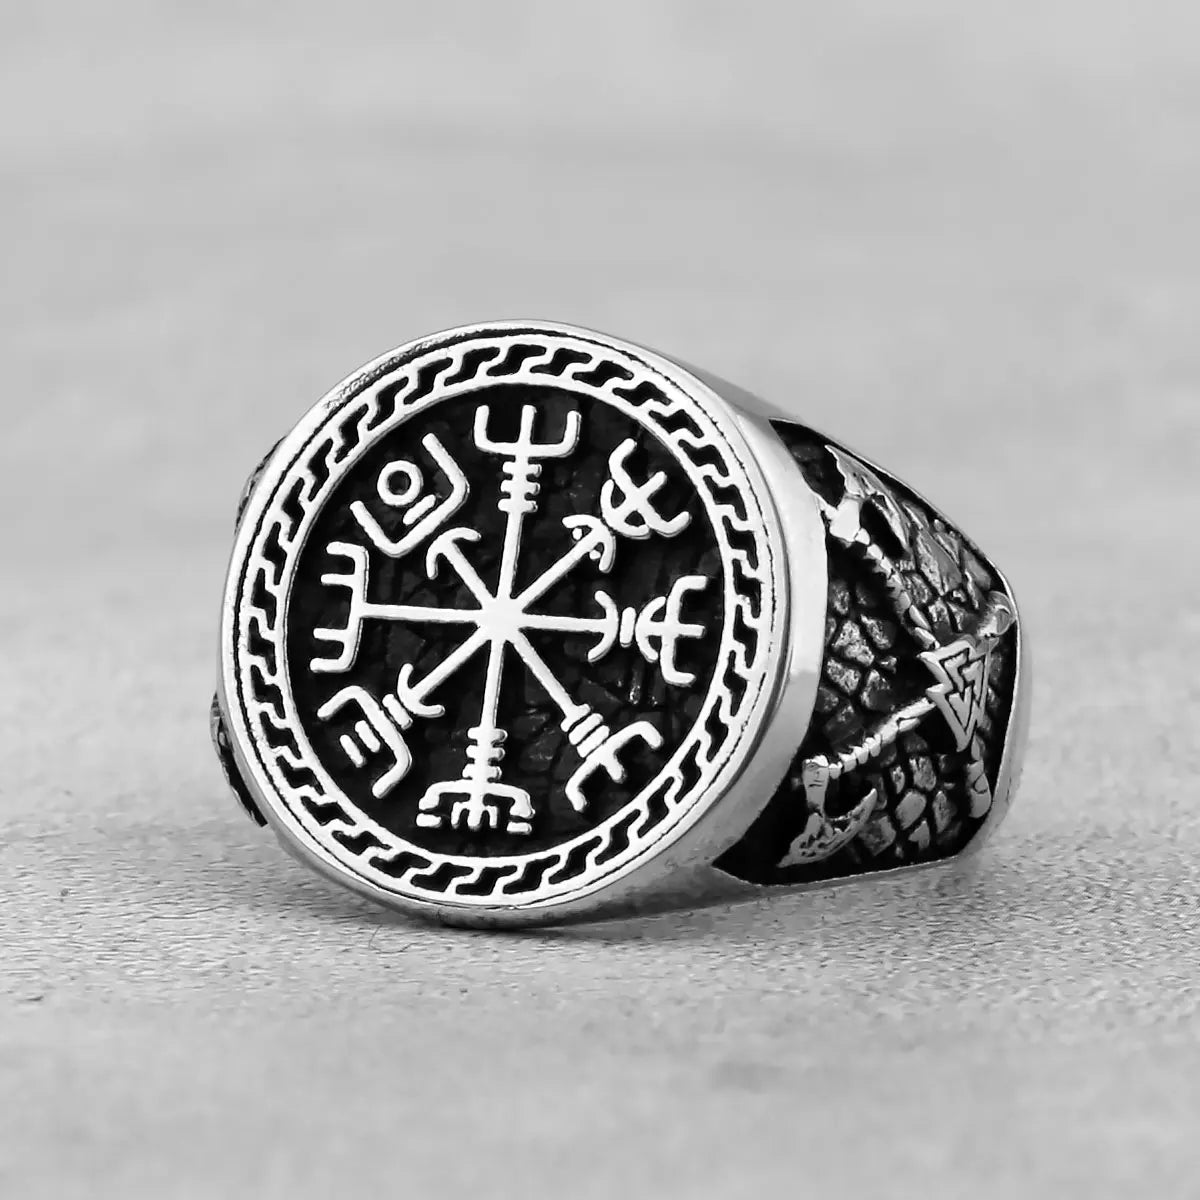 Vintage Stainless Steel Compass Men's Ring - Madeinsea©